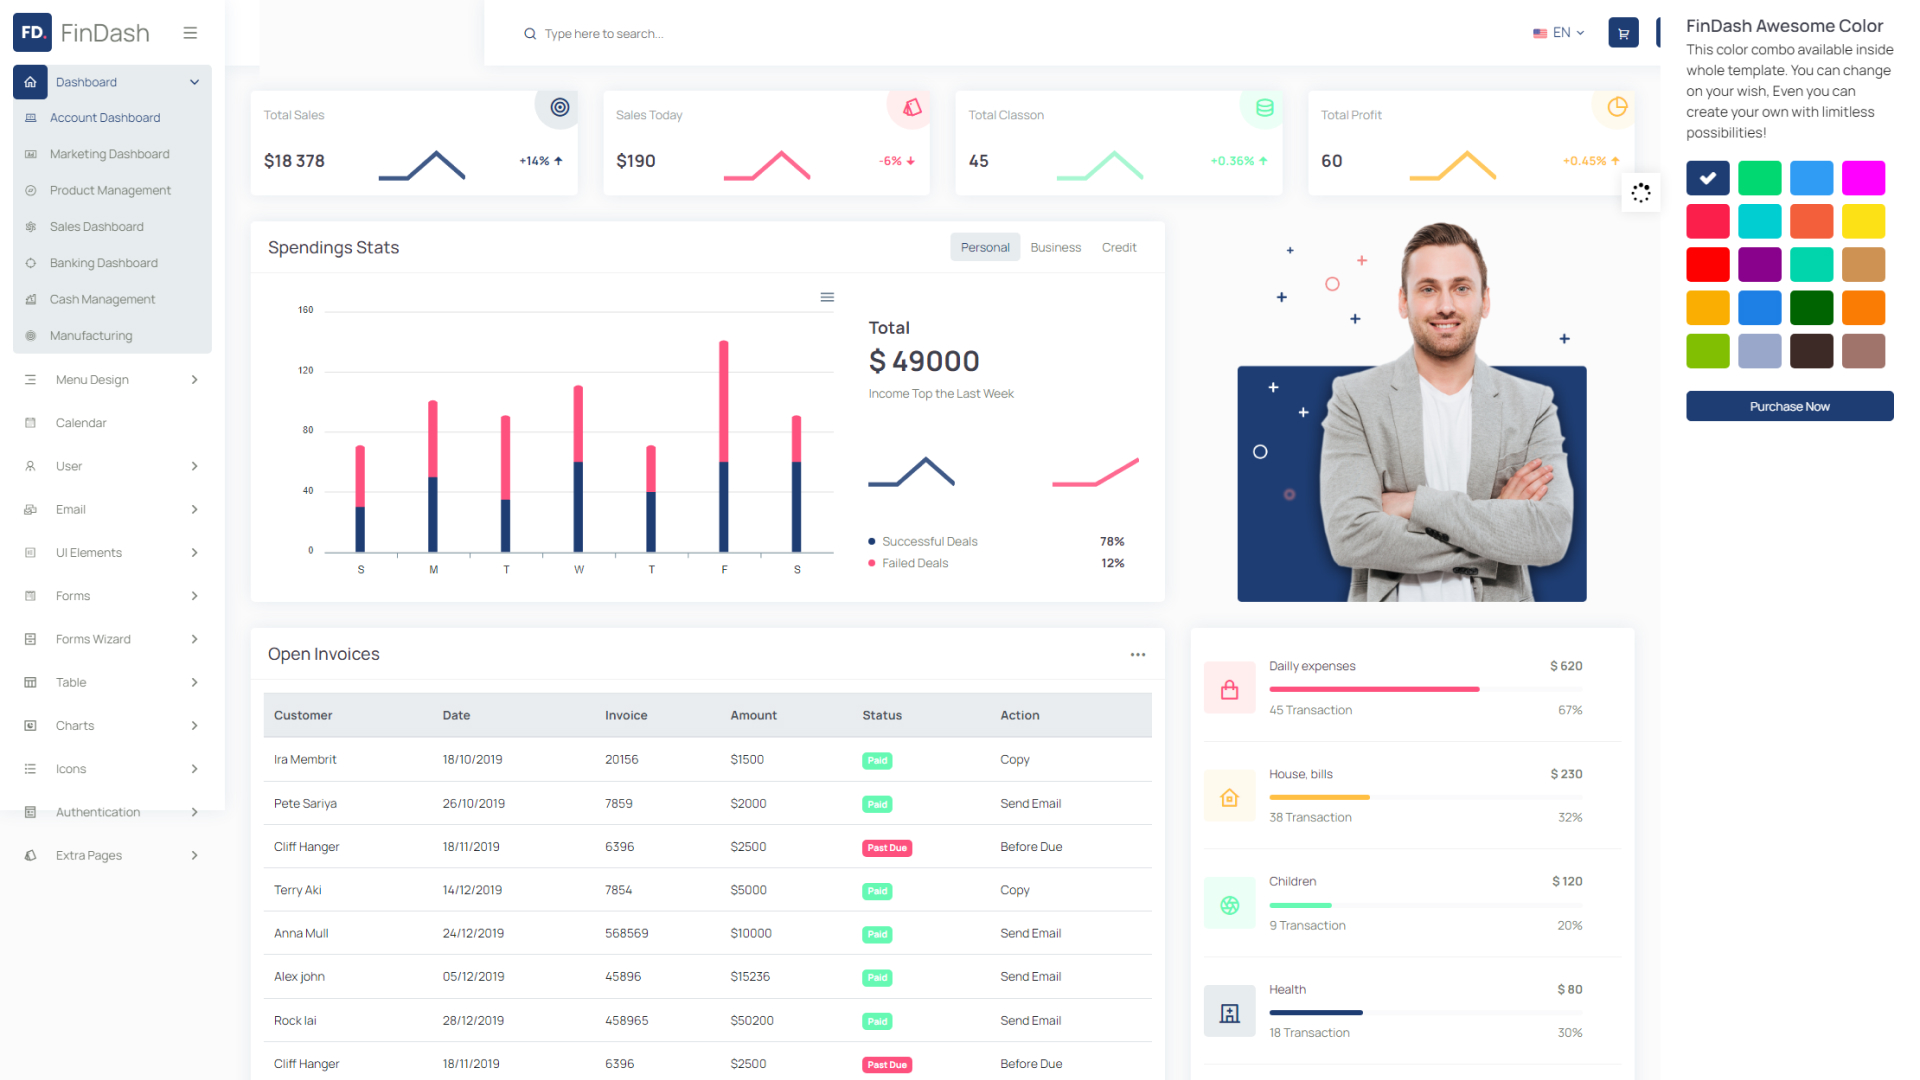 Finance Dashboard  3 professional business dashboards every industry needs to run optimally 3 Professional Business Dashboards Every Industry Needs To Run Optimally finance